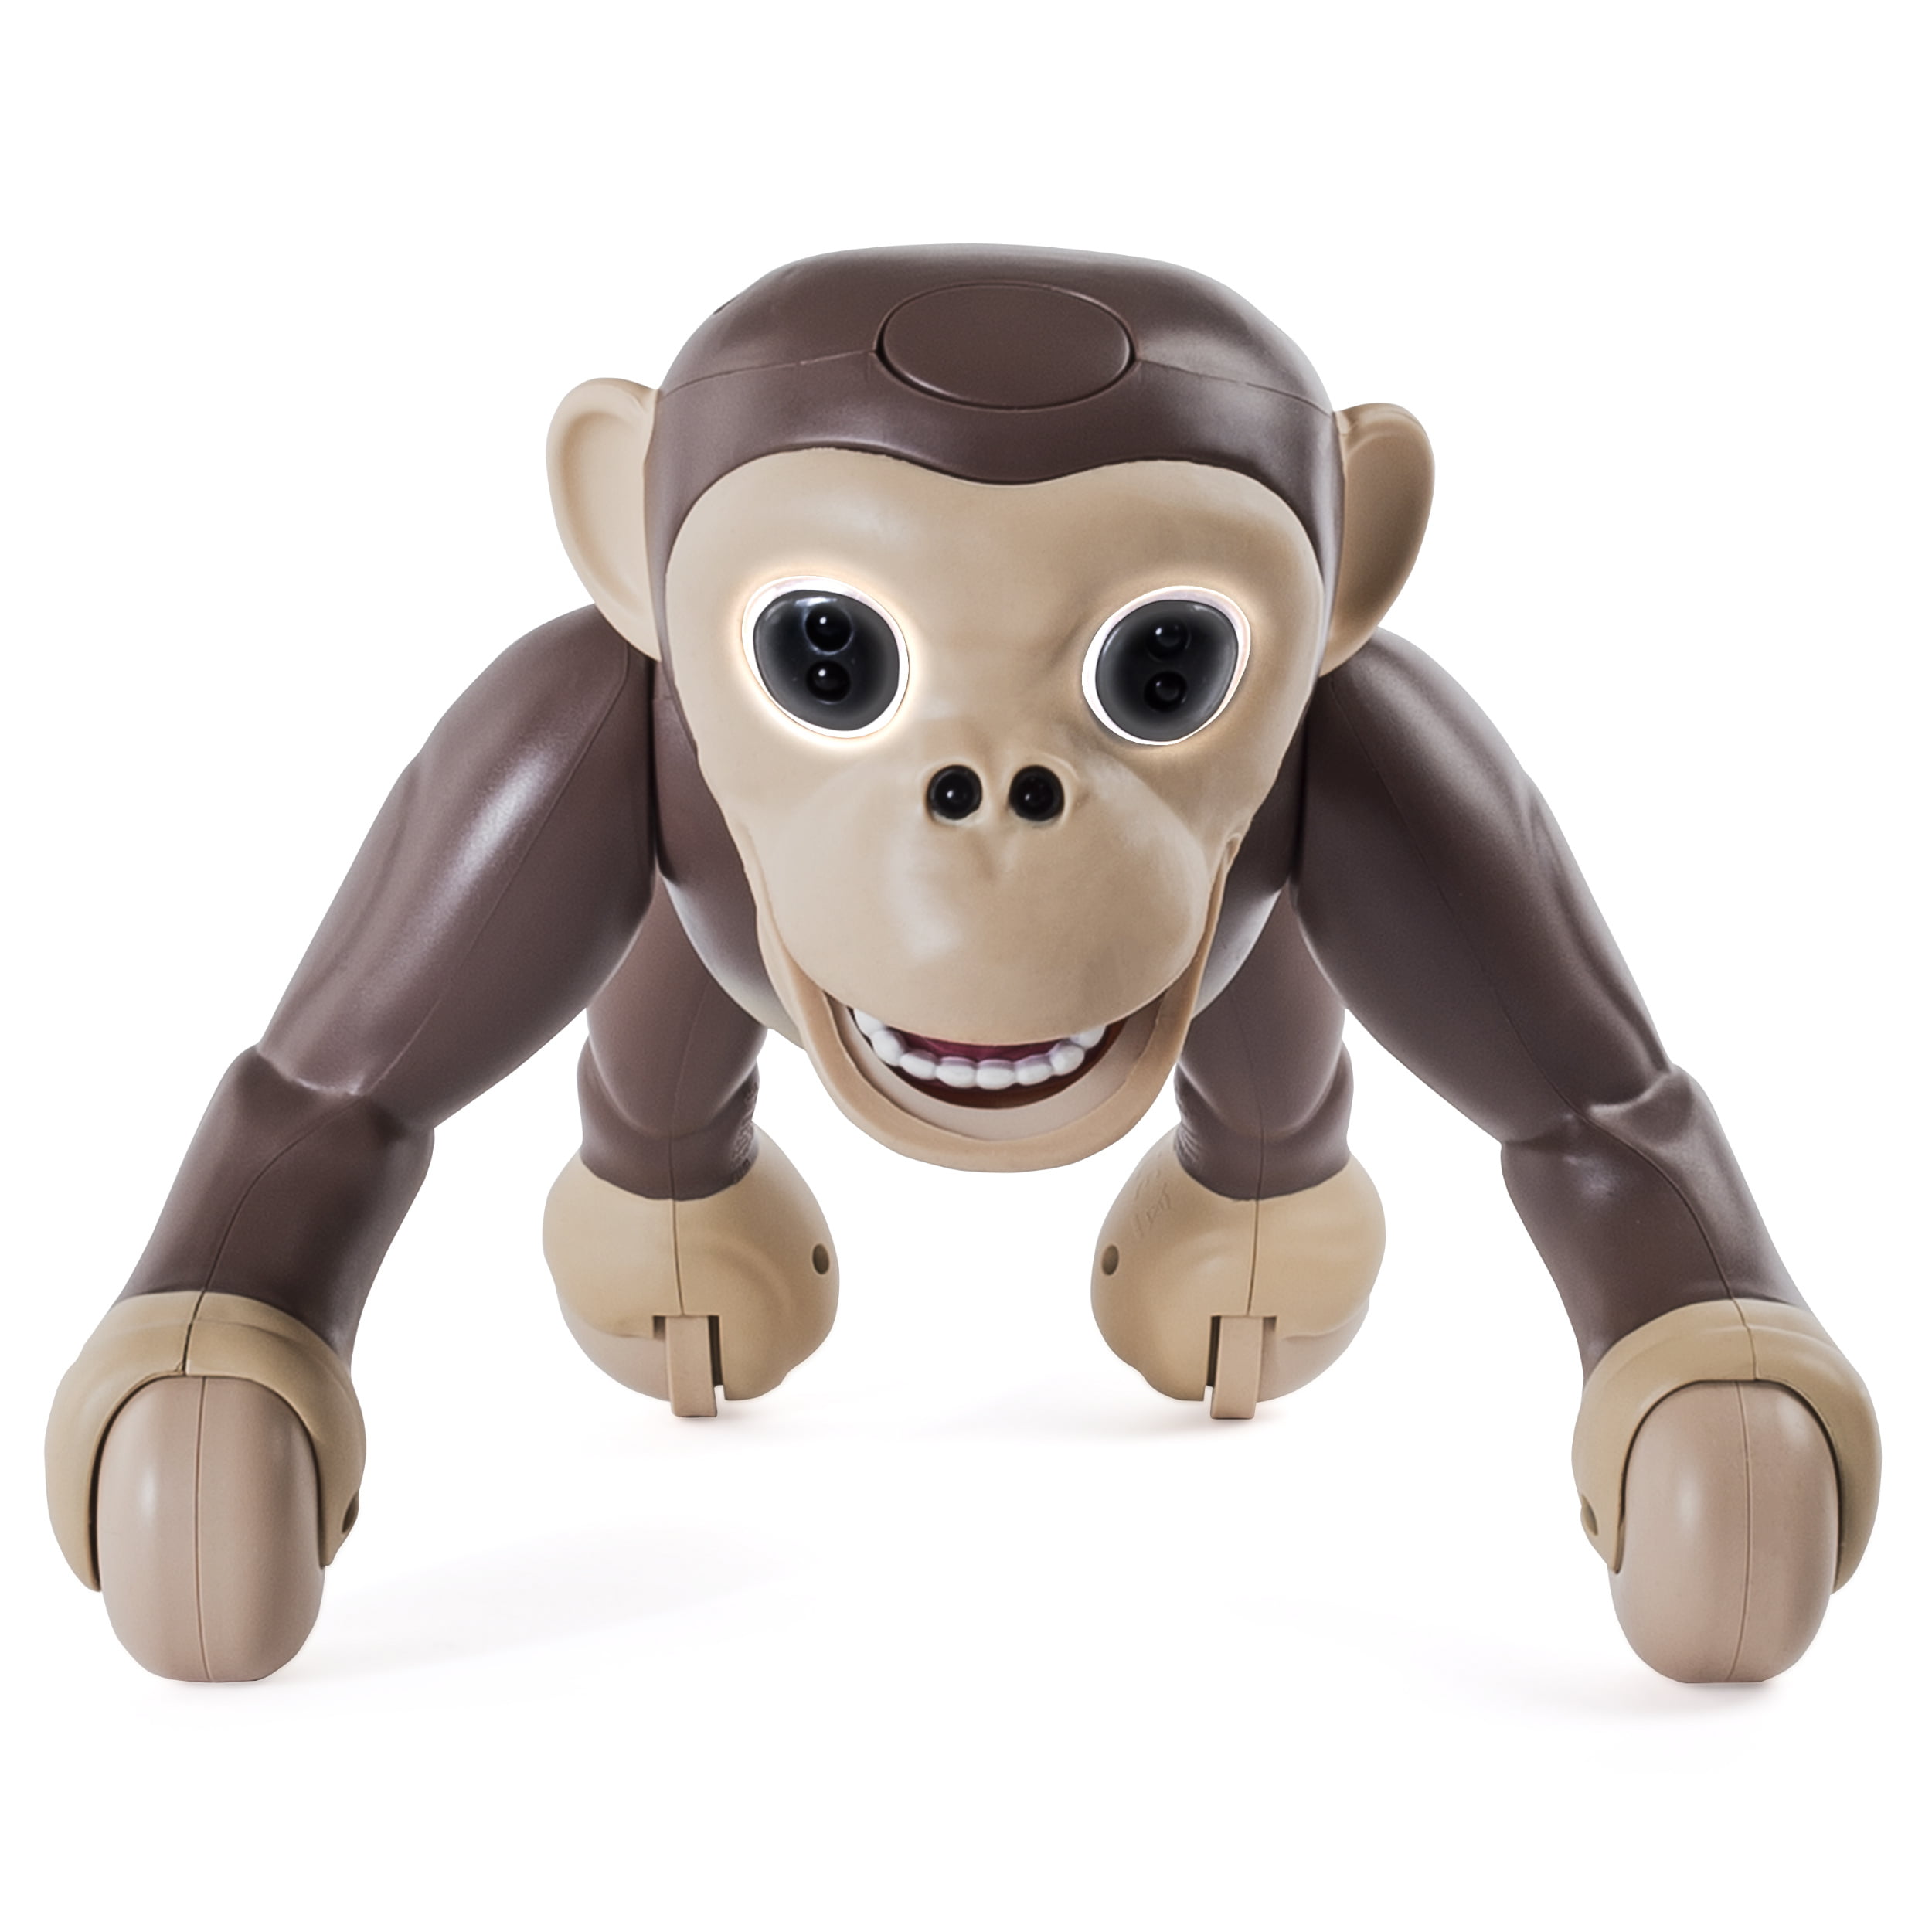 Spin Master Zoomer Chimp Interactive Toy for sale online 6027473 